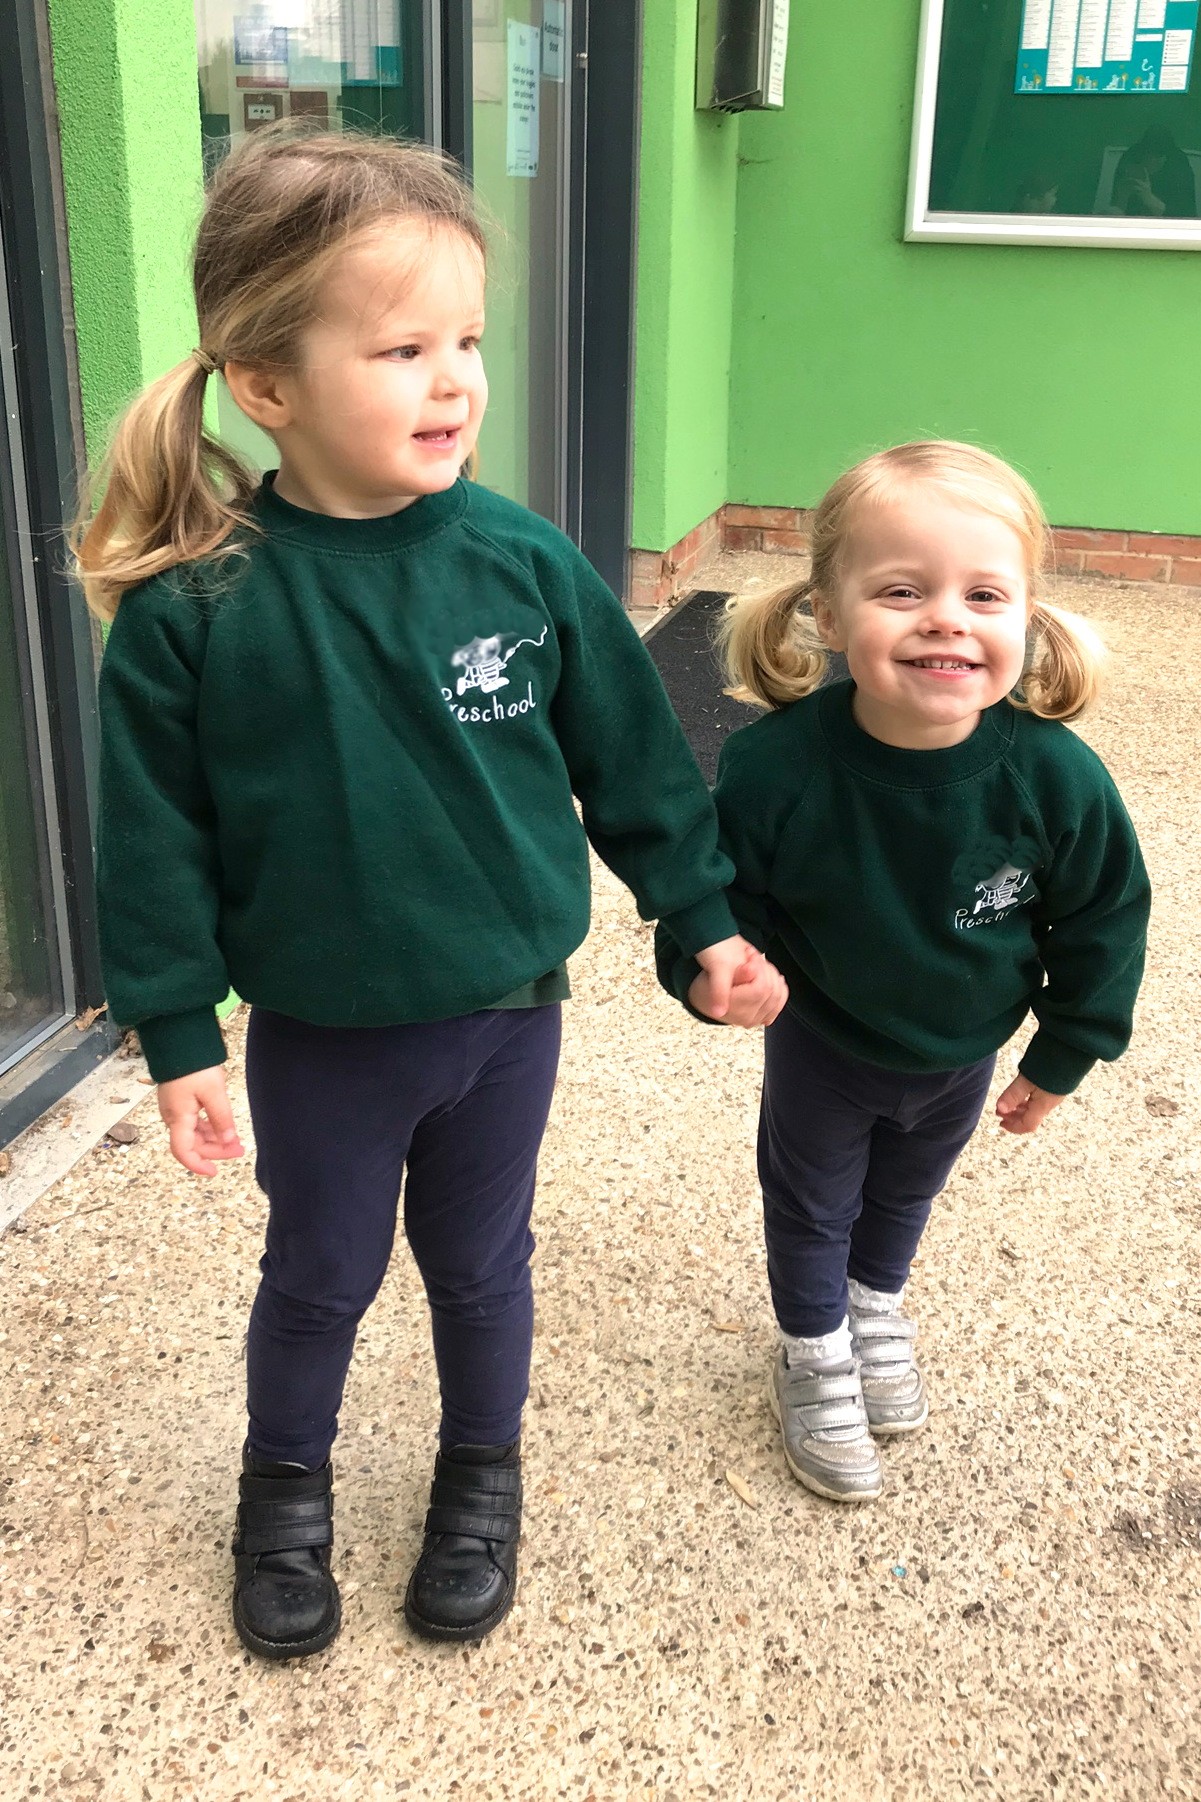 two sisters holding hands in preschool uniform, smiling
